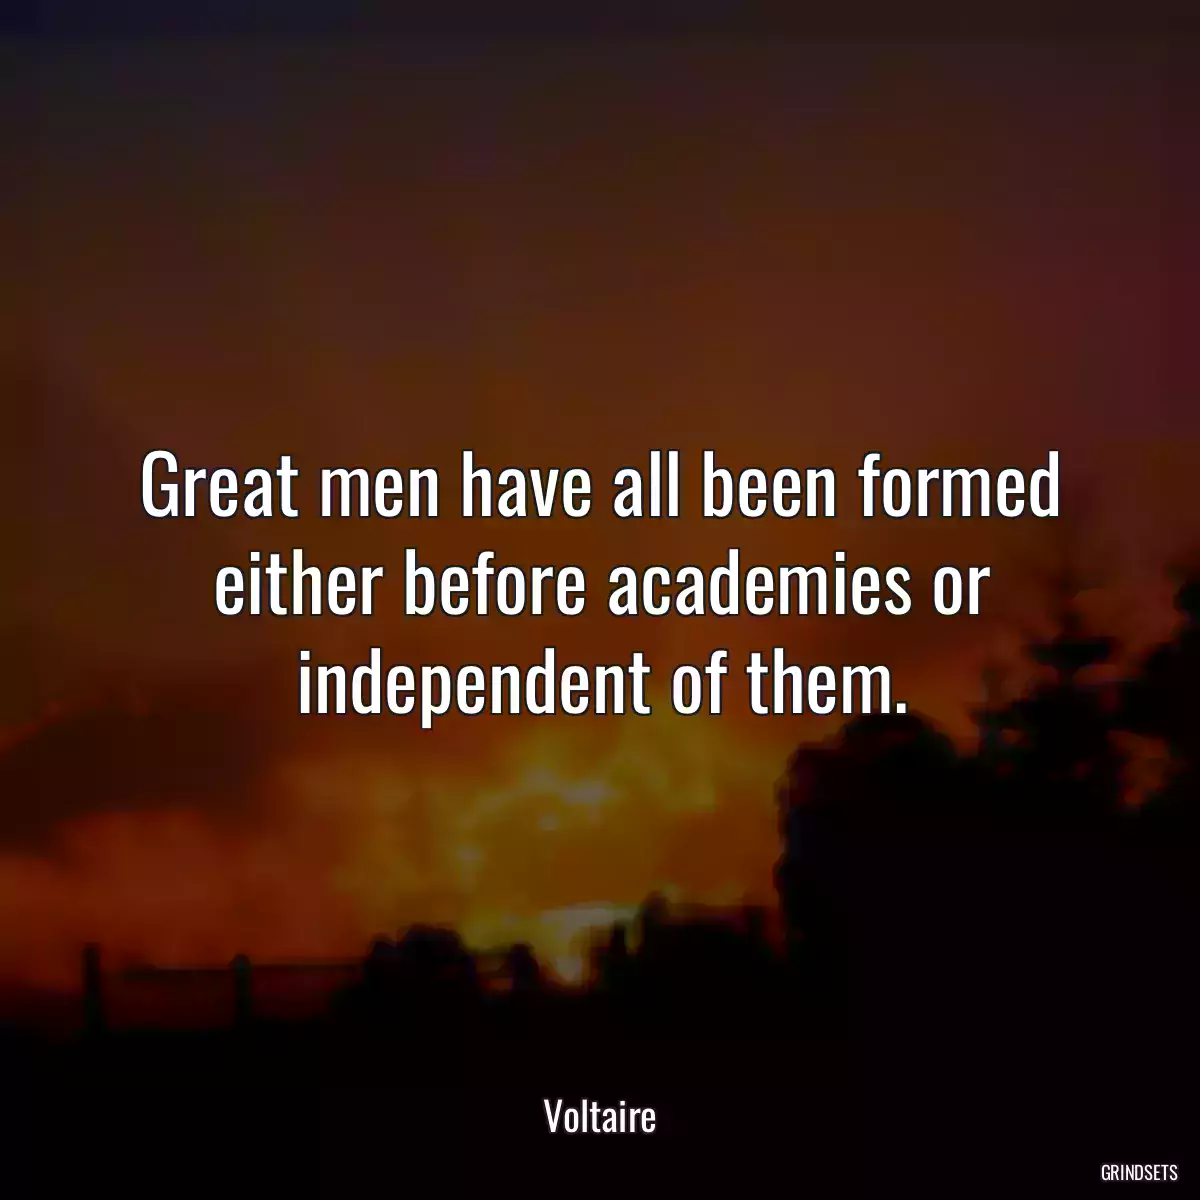 Great men have all been formed either before academies or independent of them.